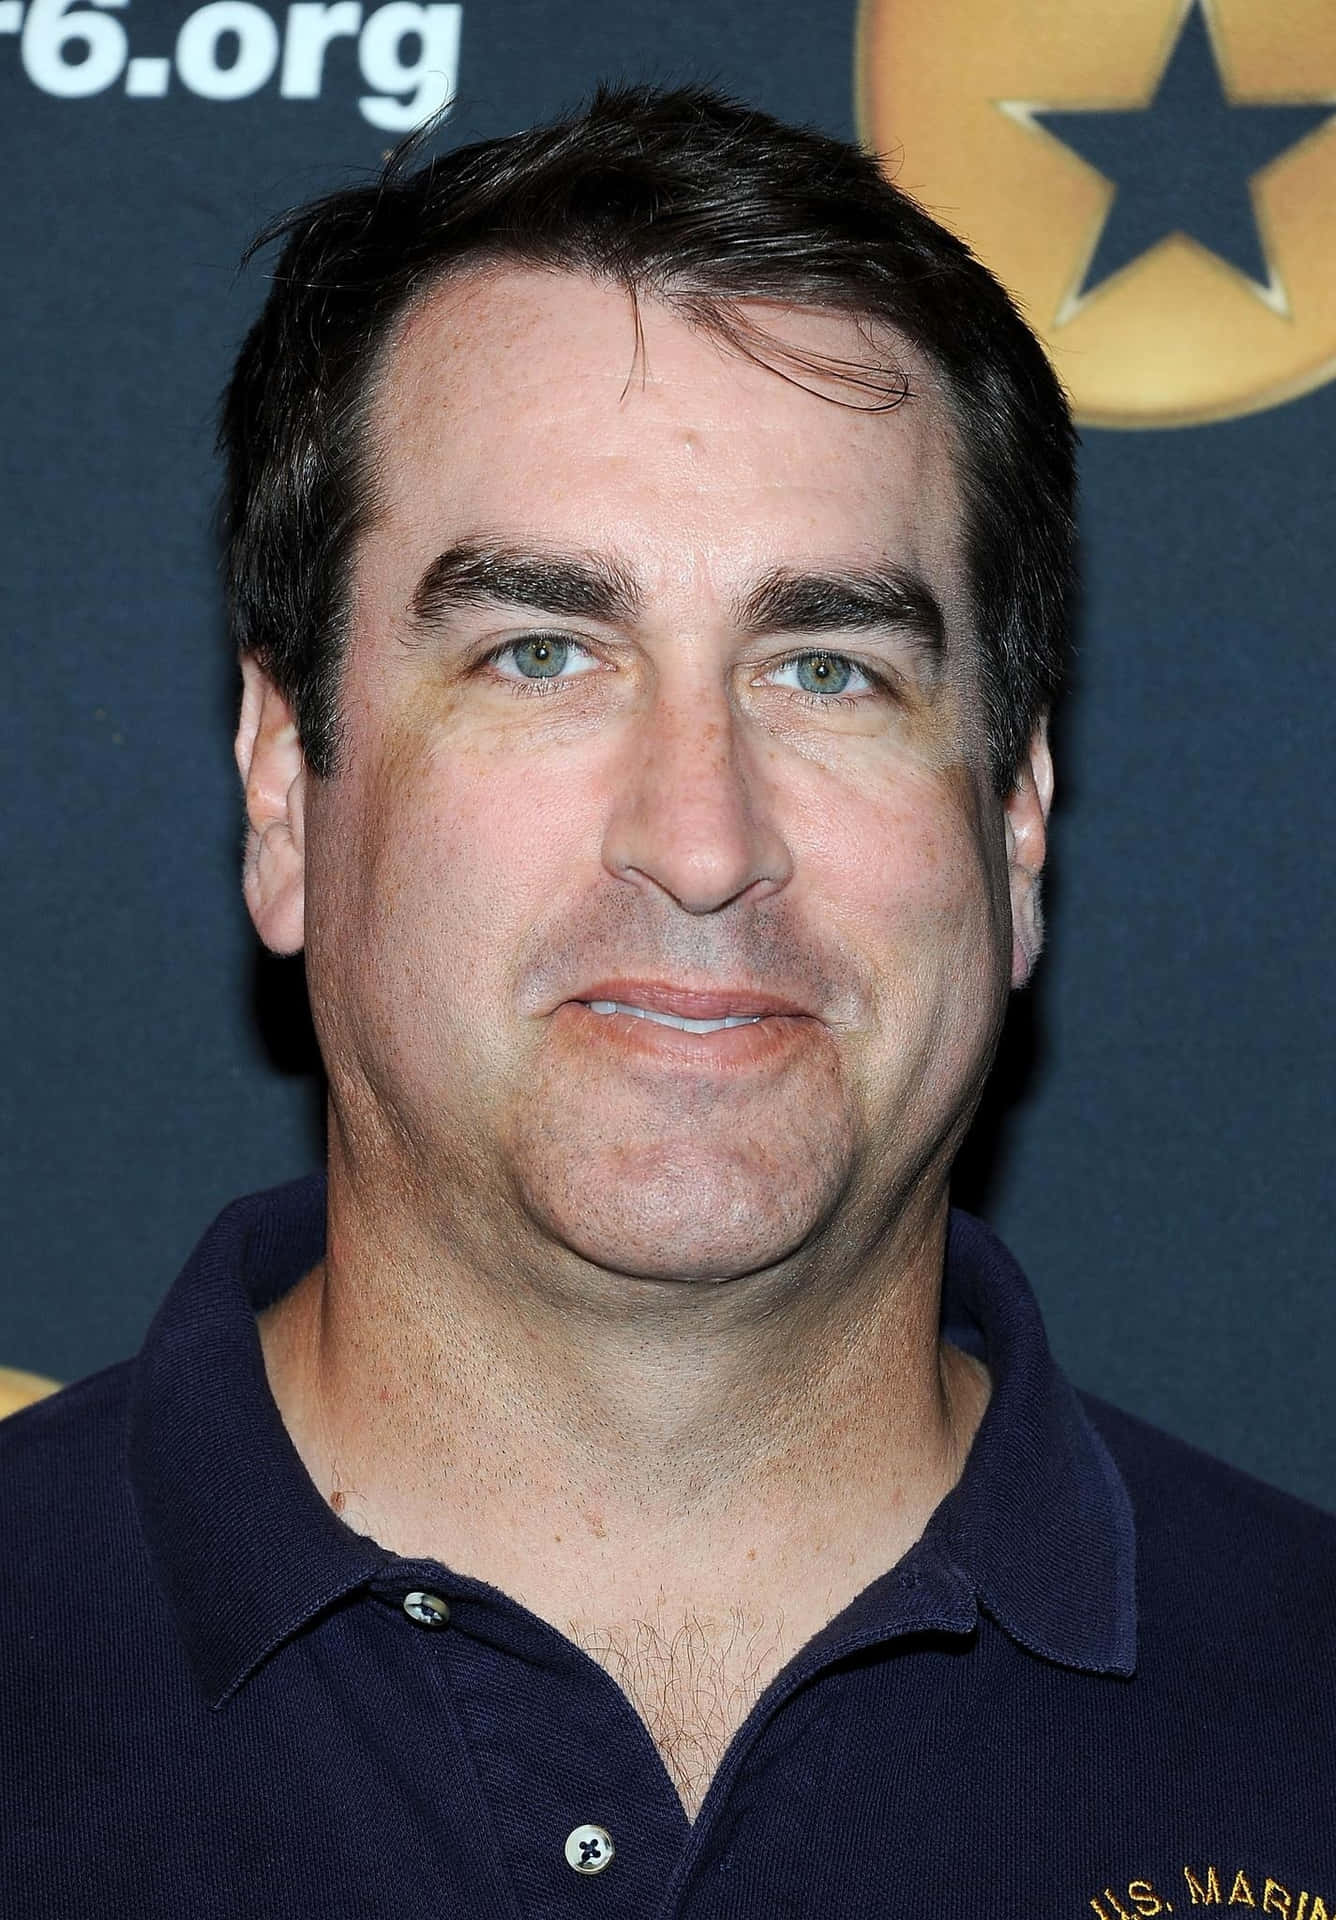 Actor Rob Riggle as he looks off into the horizon Wallpaper